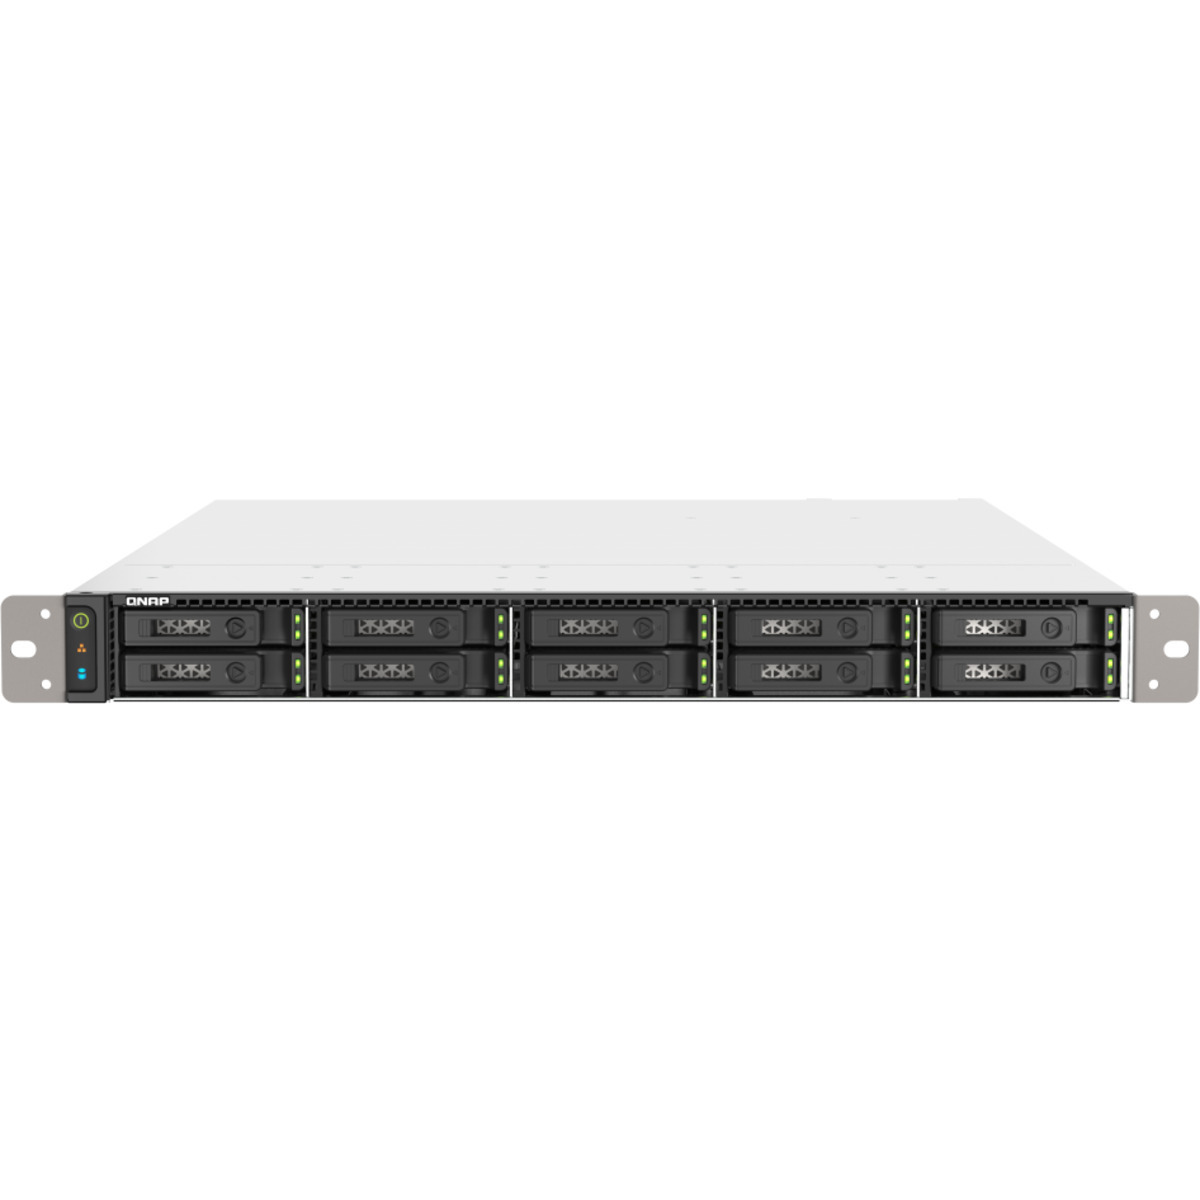 buy QNAP TS-h1090FU-7232P 40tb RackMount NAS - Network Attached Storage Device 10x4000gb Samsung 870 EVO MZ-77E4T0BAM 2.5 560/530MB/s SATA 6Gb/s SSD CONSUMER Class Drives Installed - Burn-In Tested - nas headquarters buy network attached storage server device das new raid-5 free shipping simply usa TS-h1090FU-7232P